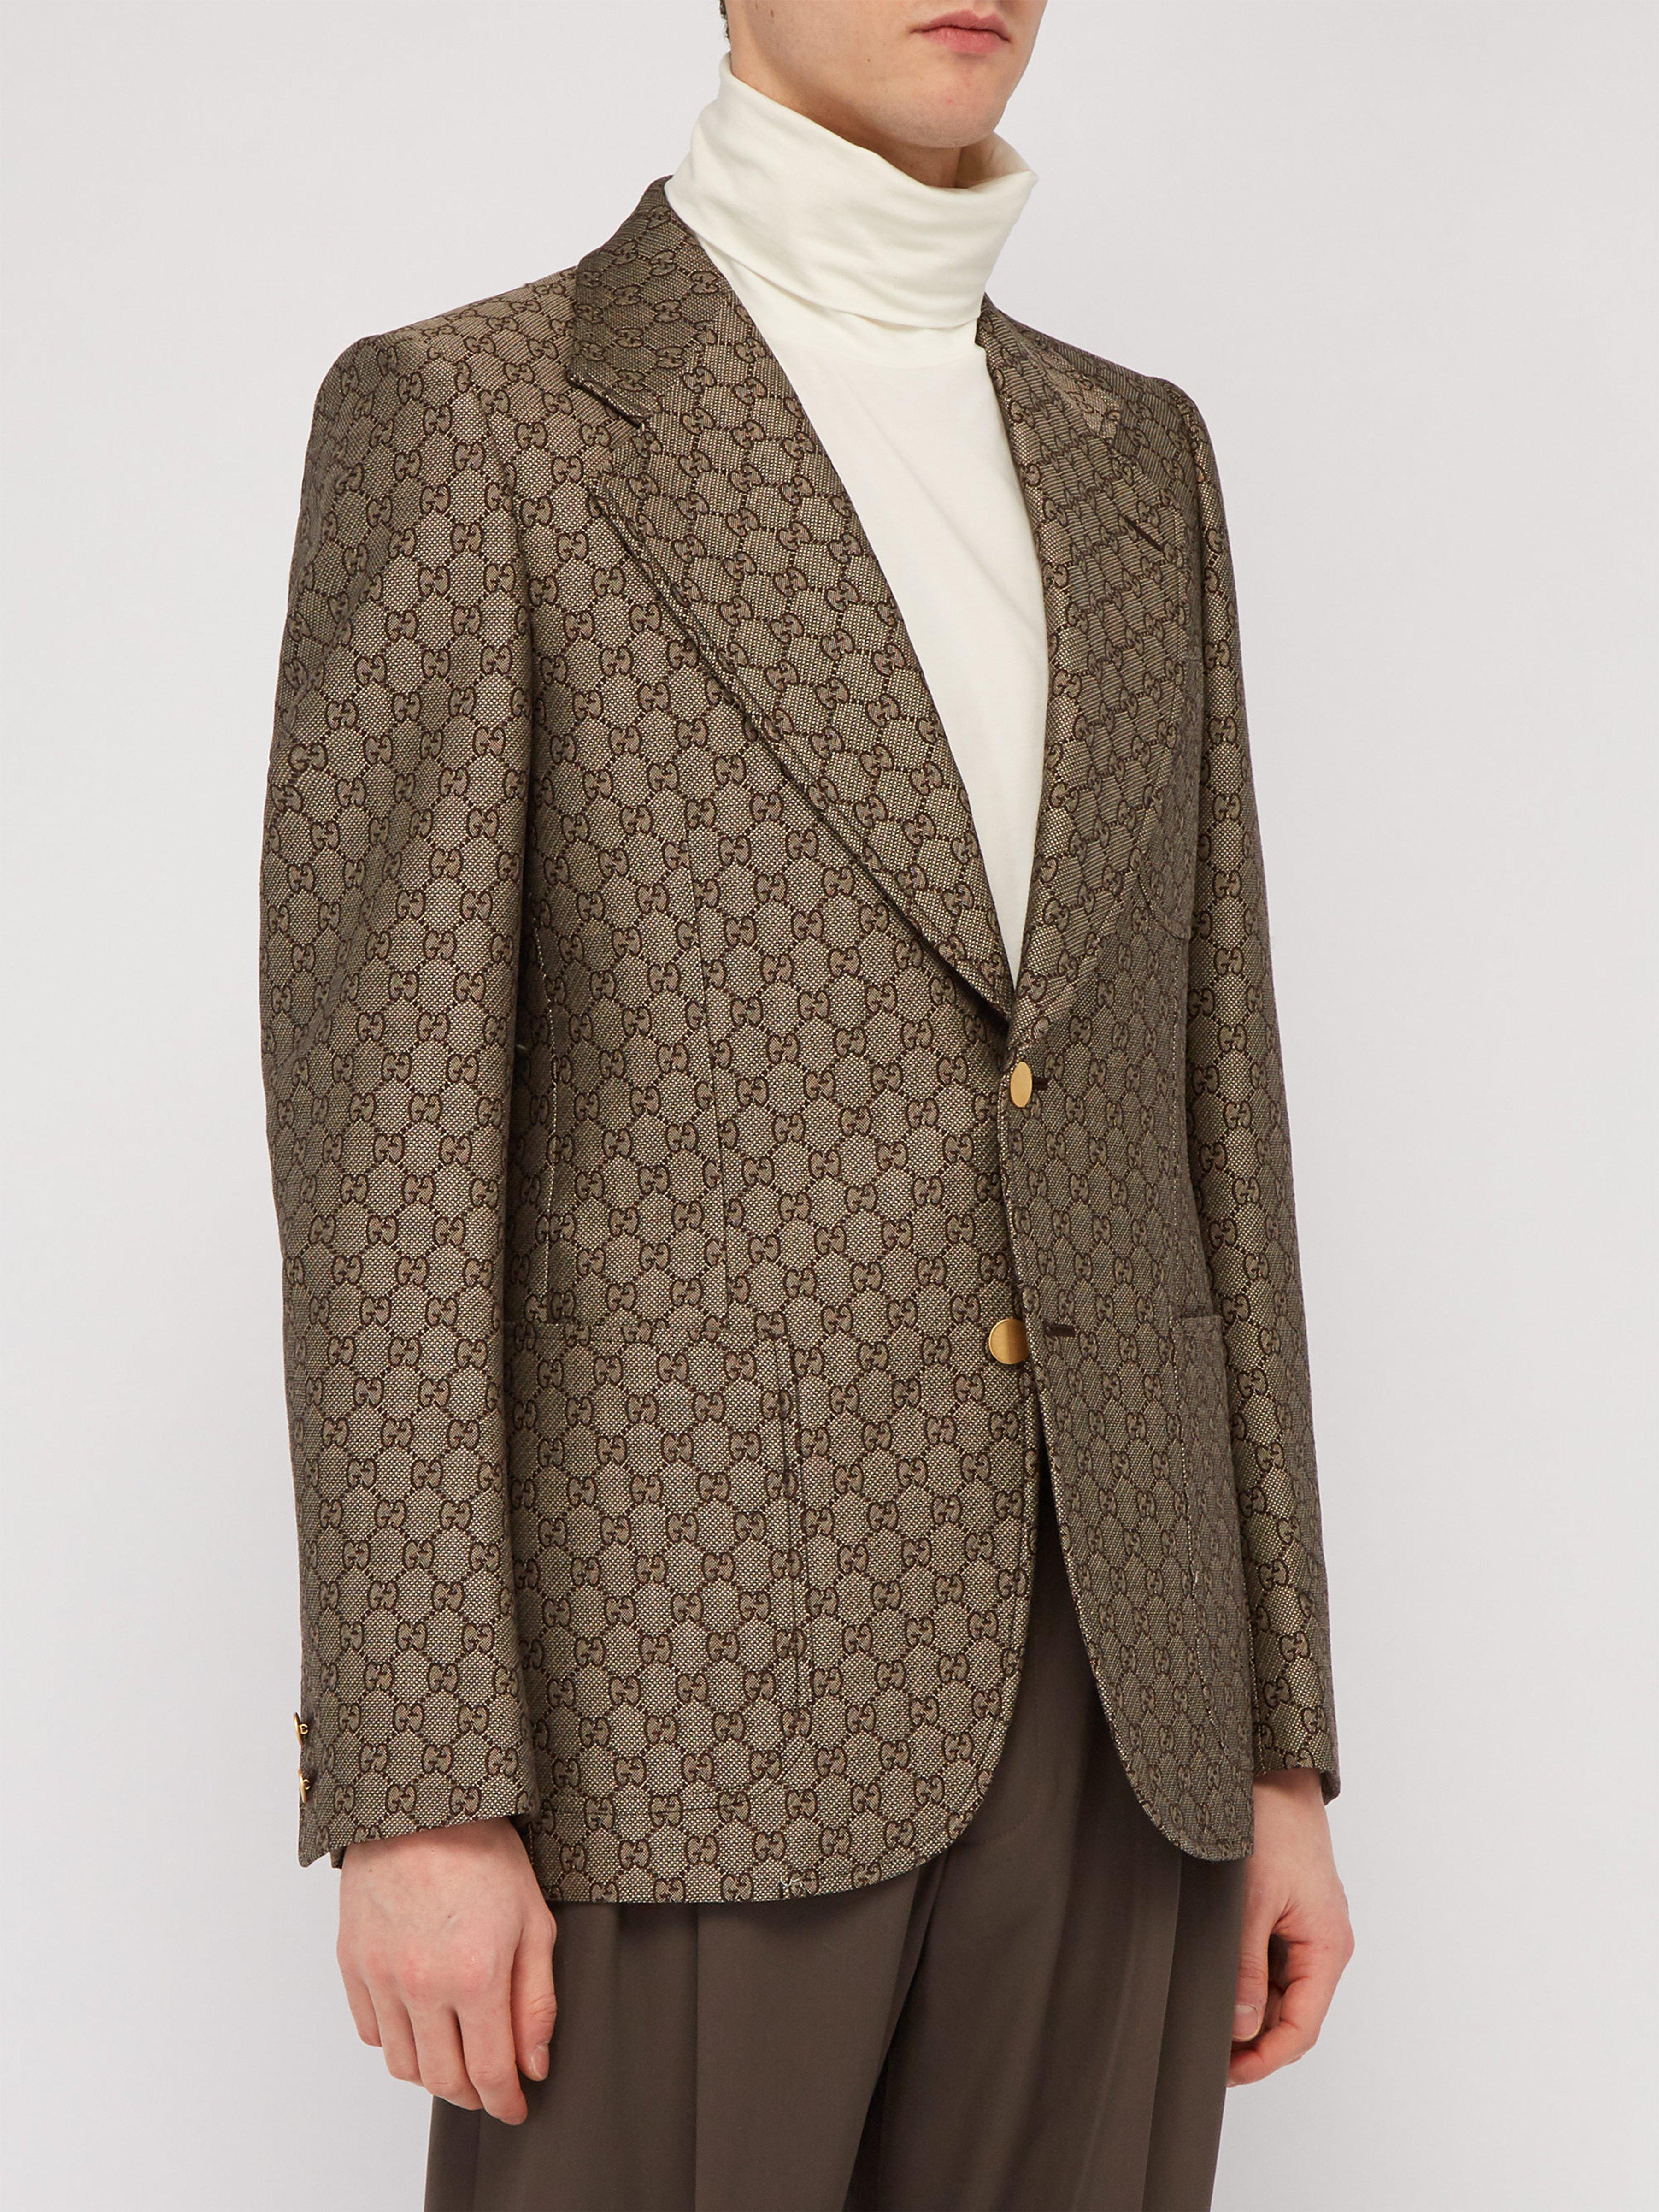 Gucci Gg Monogram Single Breasted Suit Jacket in Natural for Men | Lyst UK